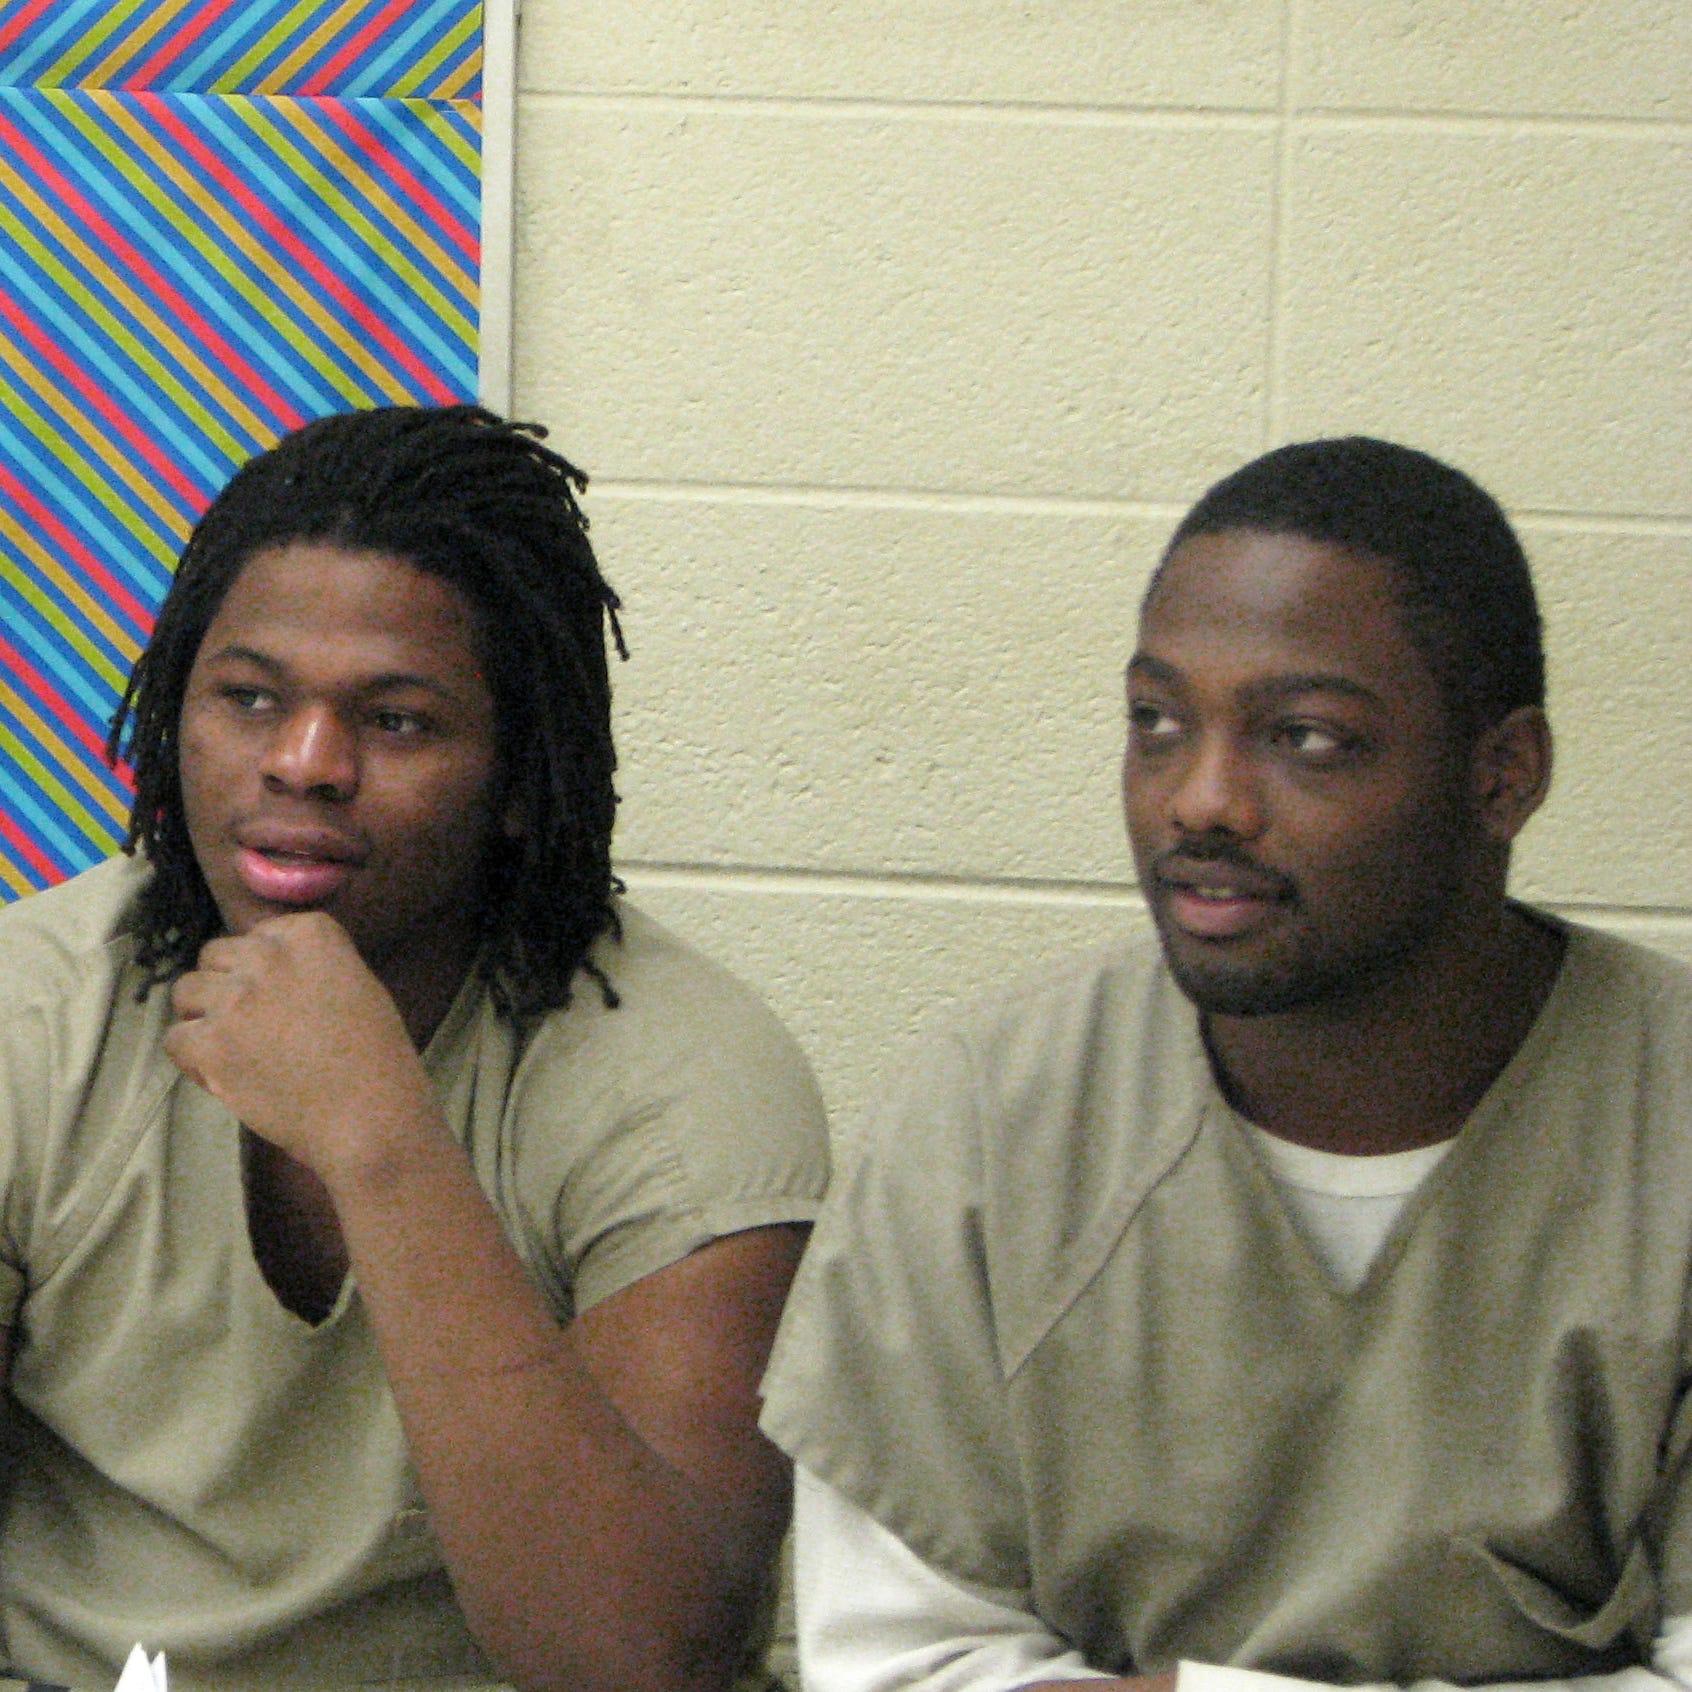 From left, Xavier Tate, Aurelius Canada and Romell Young listen to their instructor during a job interview exercise at the Cook County Jail in Chicago. The men are participants in the S.A.V.E. program, which includes intensive behavioral therapy and 